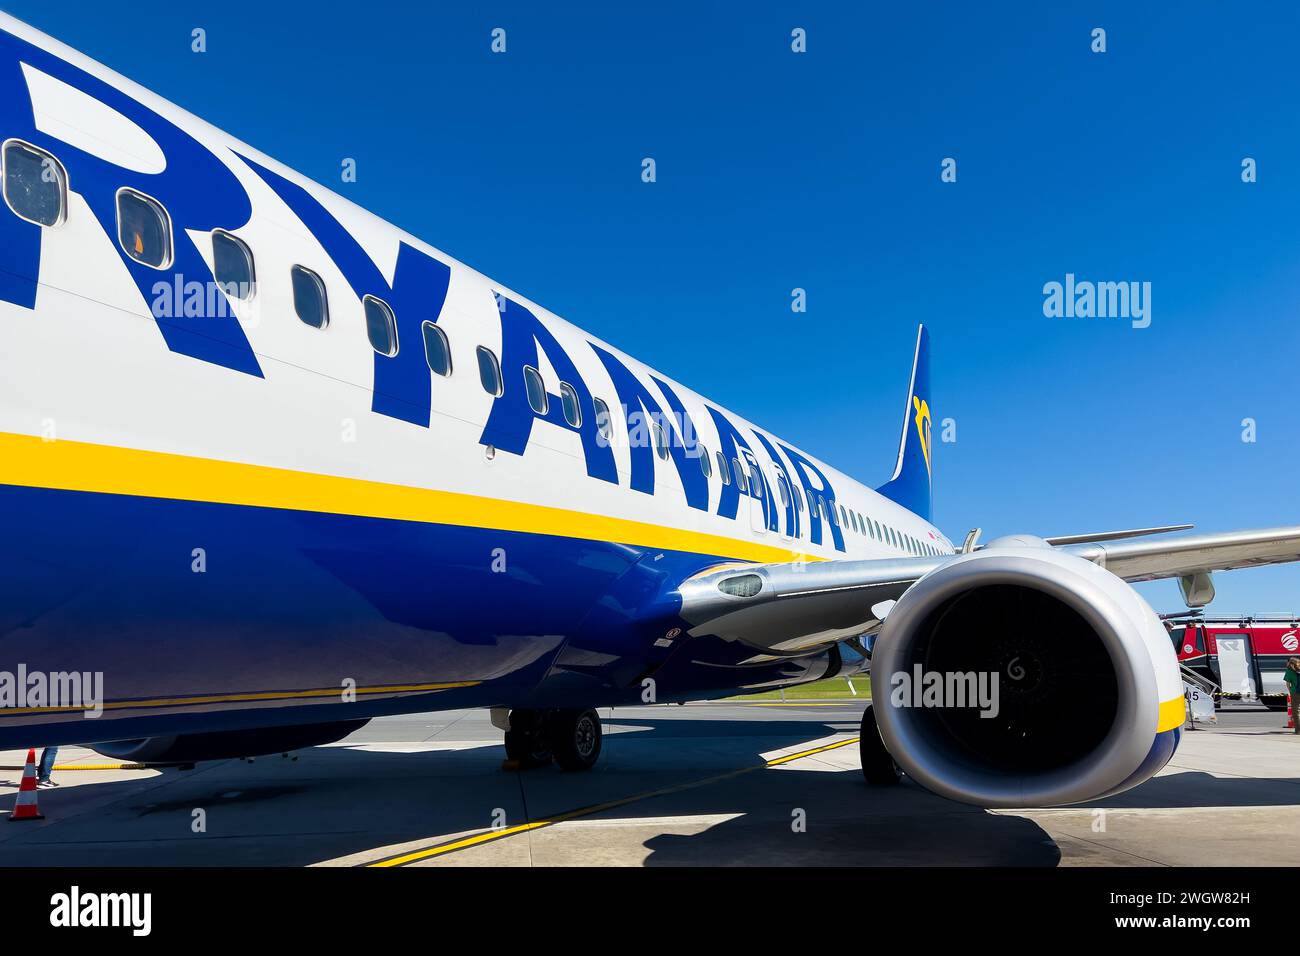 Warsaw, Poland - July 3, 2022: Airplane Boeing 737-800 (SP-RSD) of Ryanair in Warsaw Modlin Airport Stock Photo